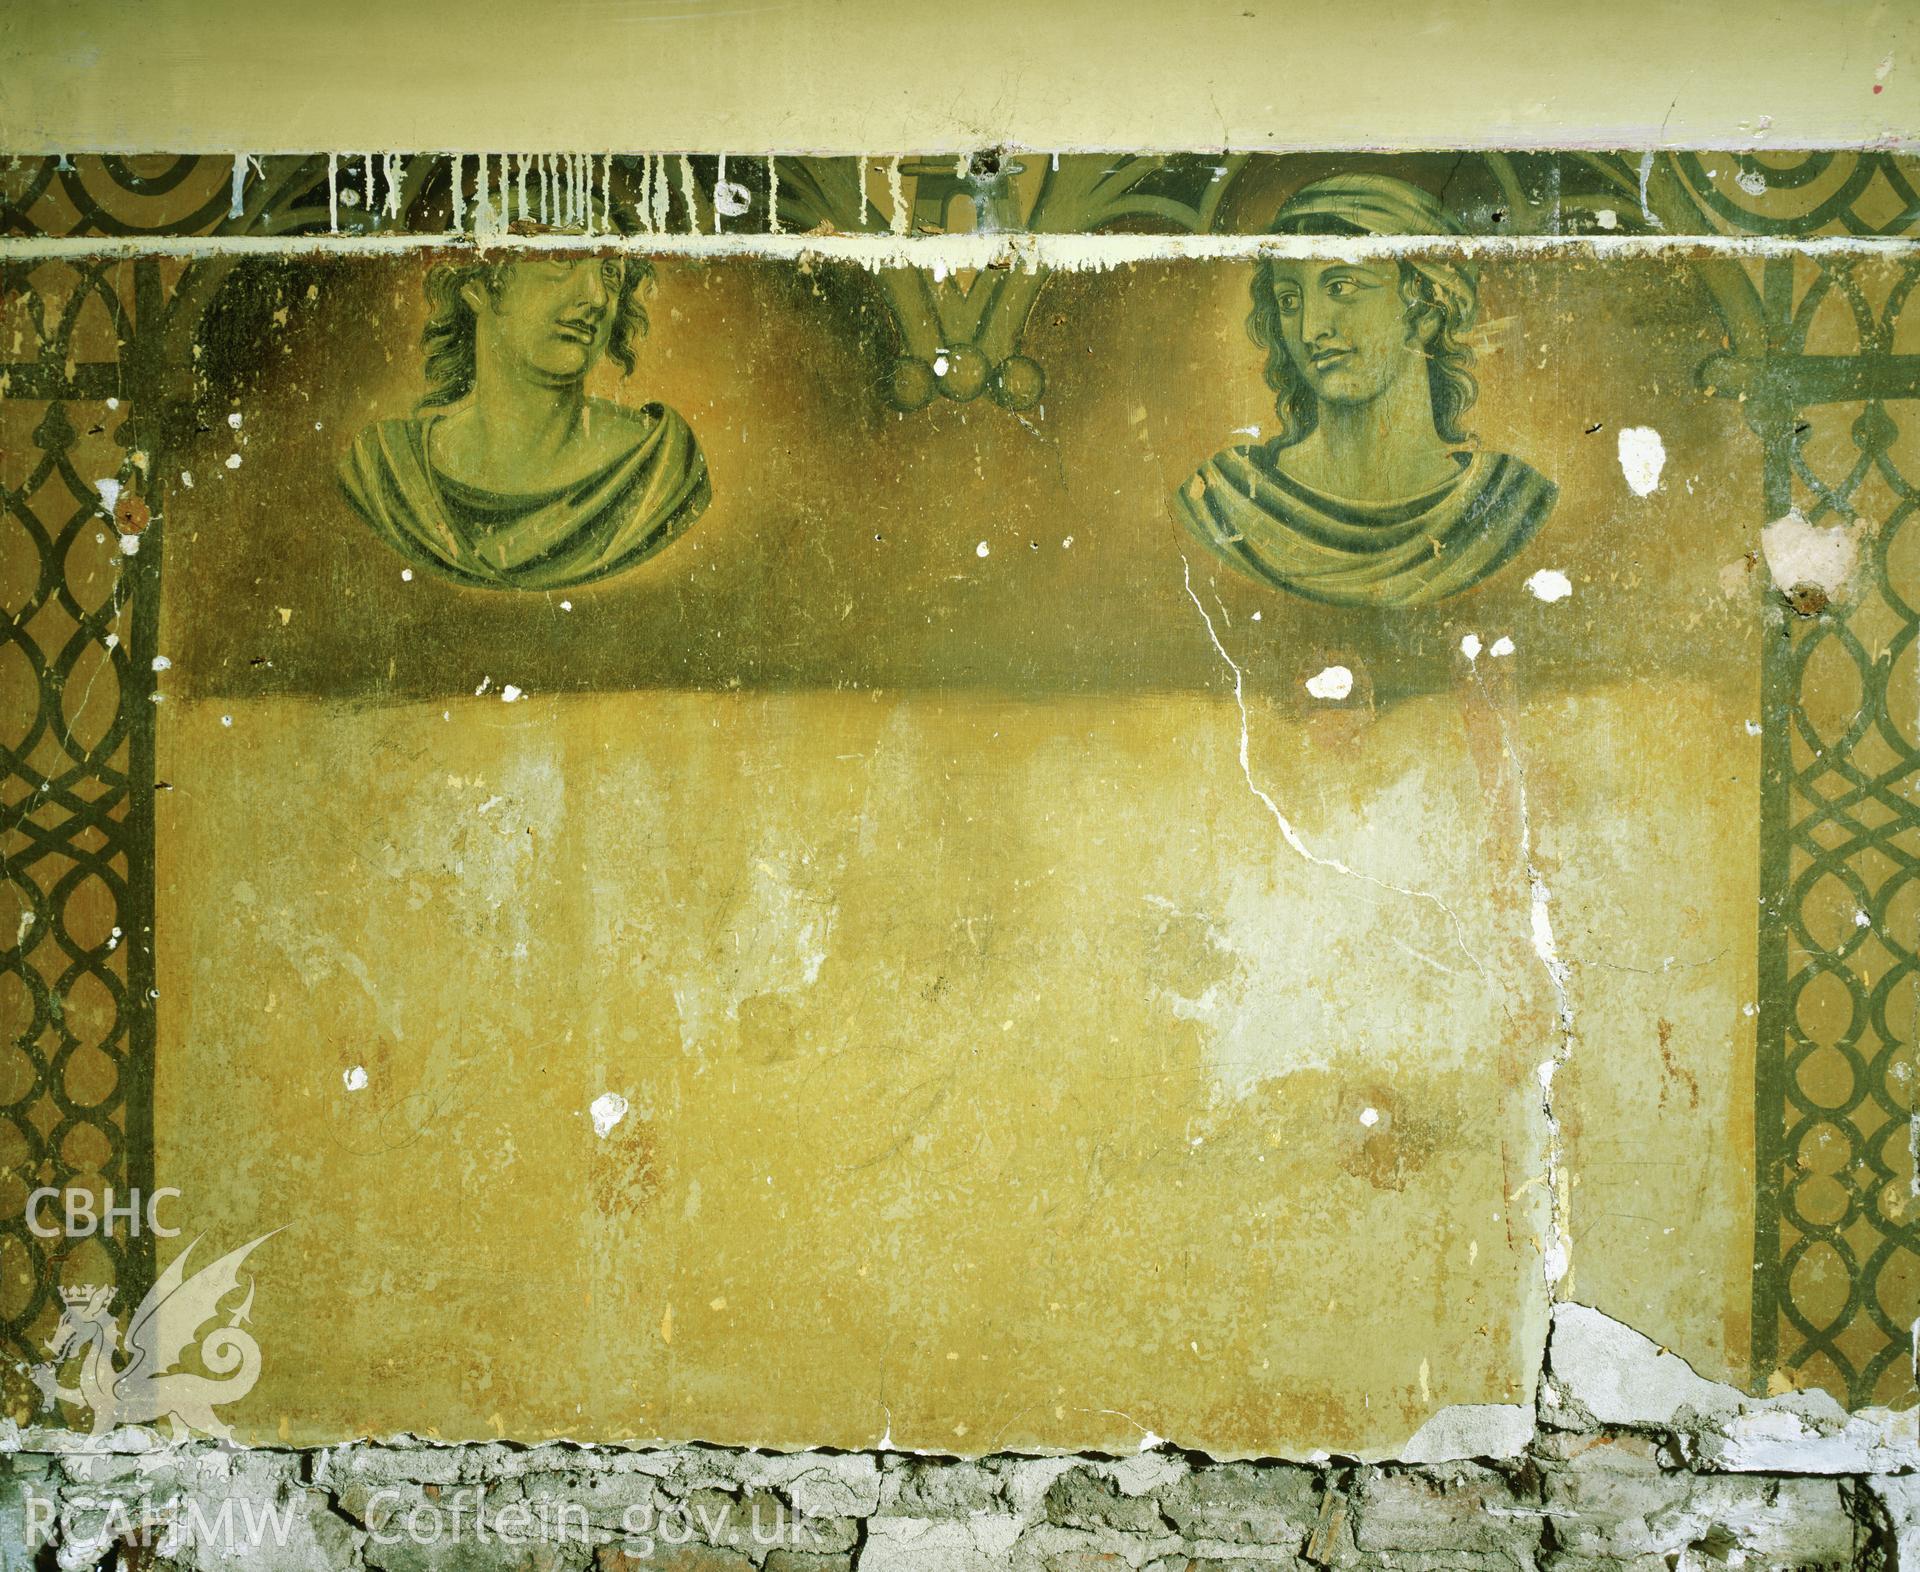 RCAHMW colour transparency showing wallpainting of two classical heads, at Elwy Bank, St Asaph, photographed by Iain Wright, November 2003.